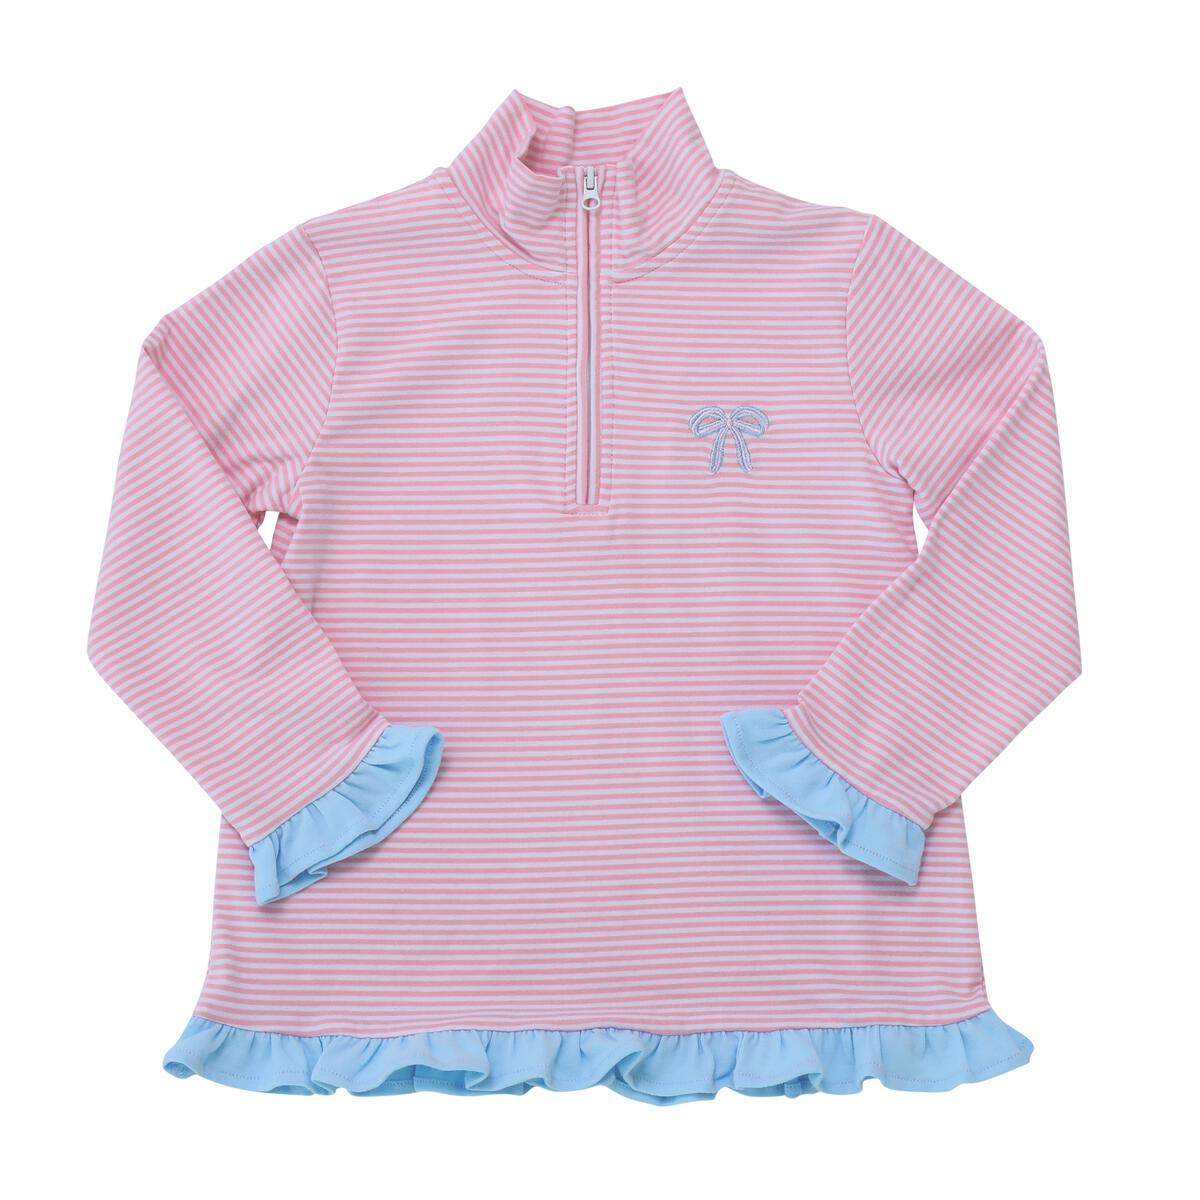 A high-quality Itsy Bitsy 1/4 Zip Pullover - Pink & Blue Ruffle Bow with ruffles.